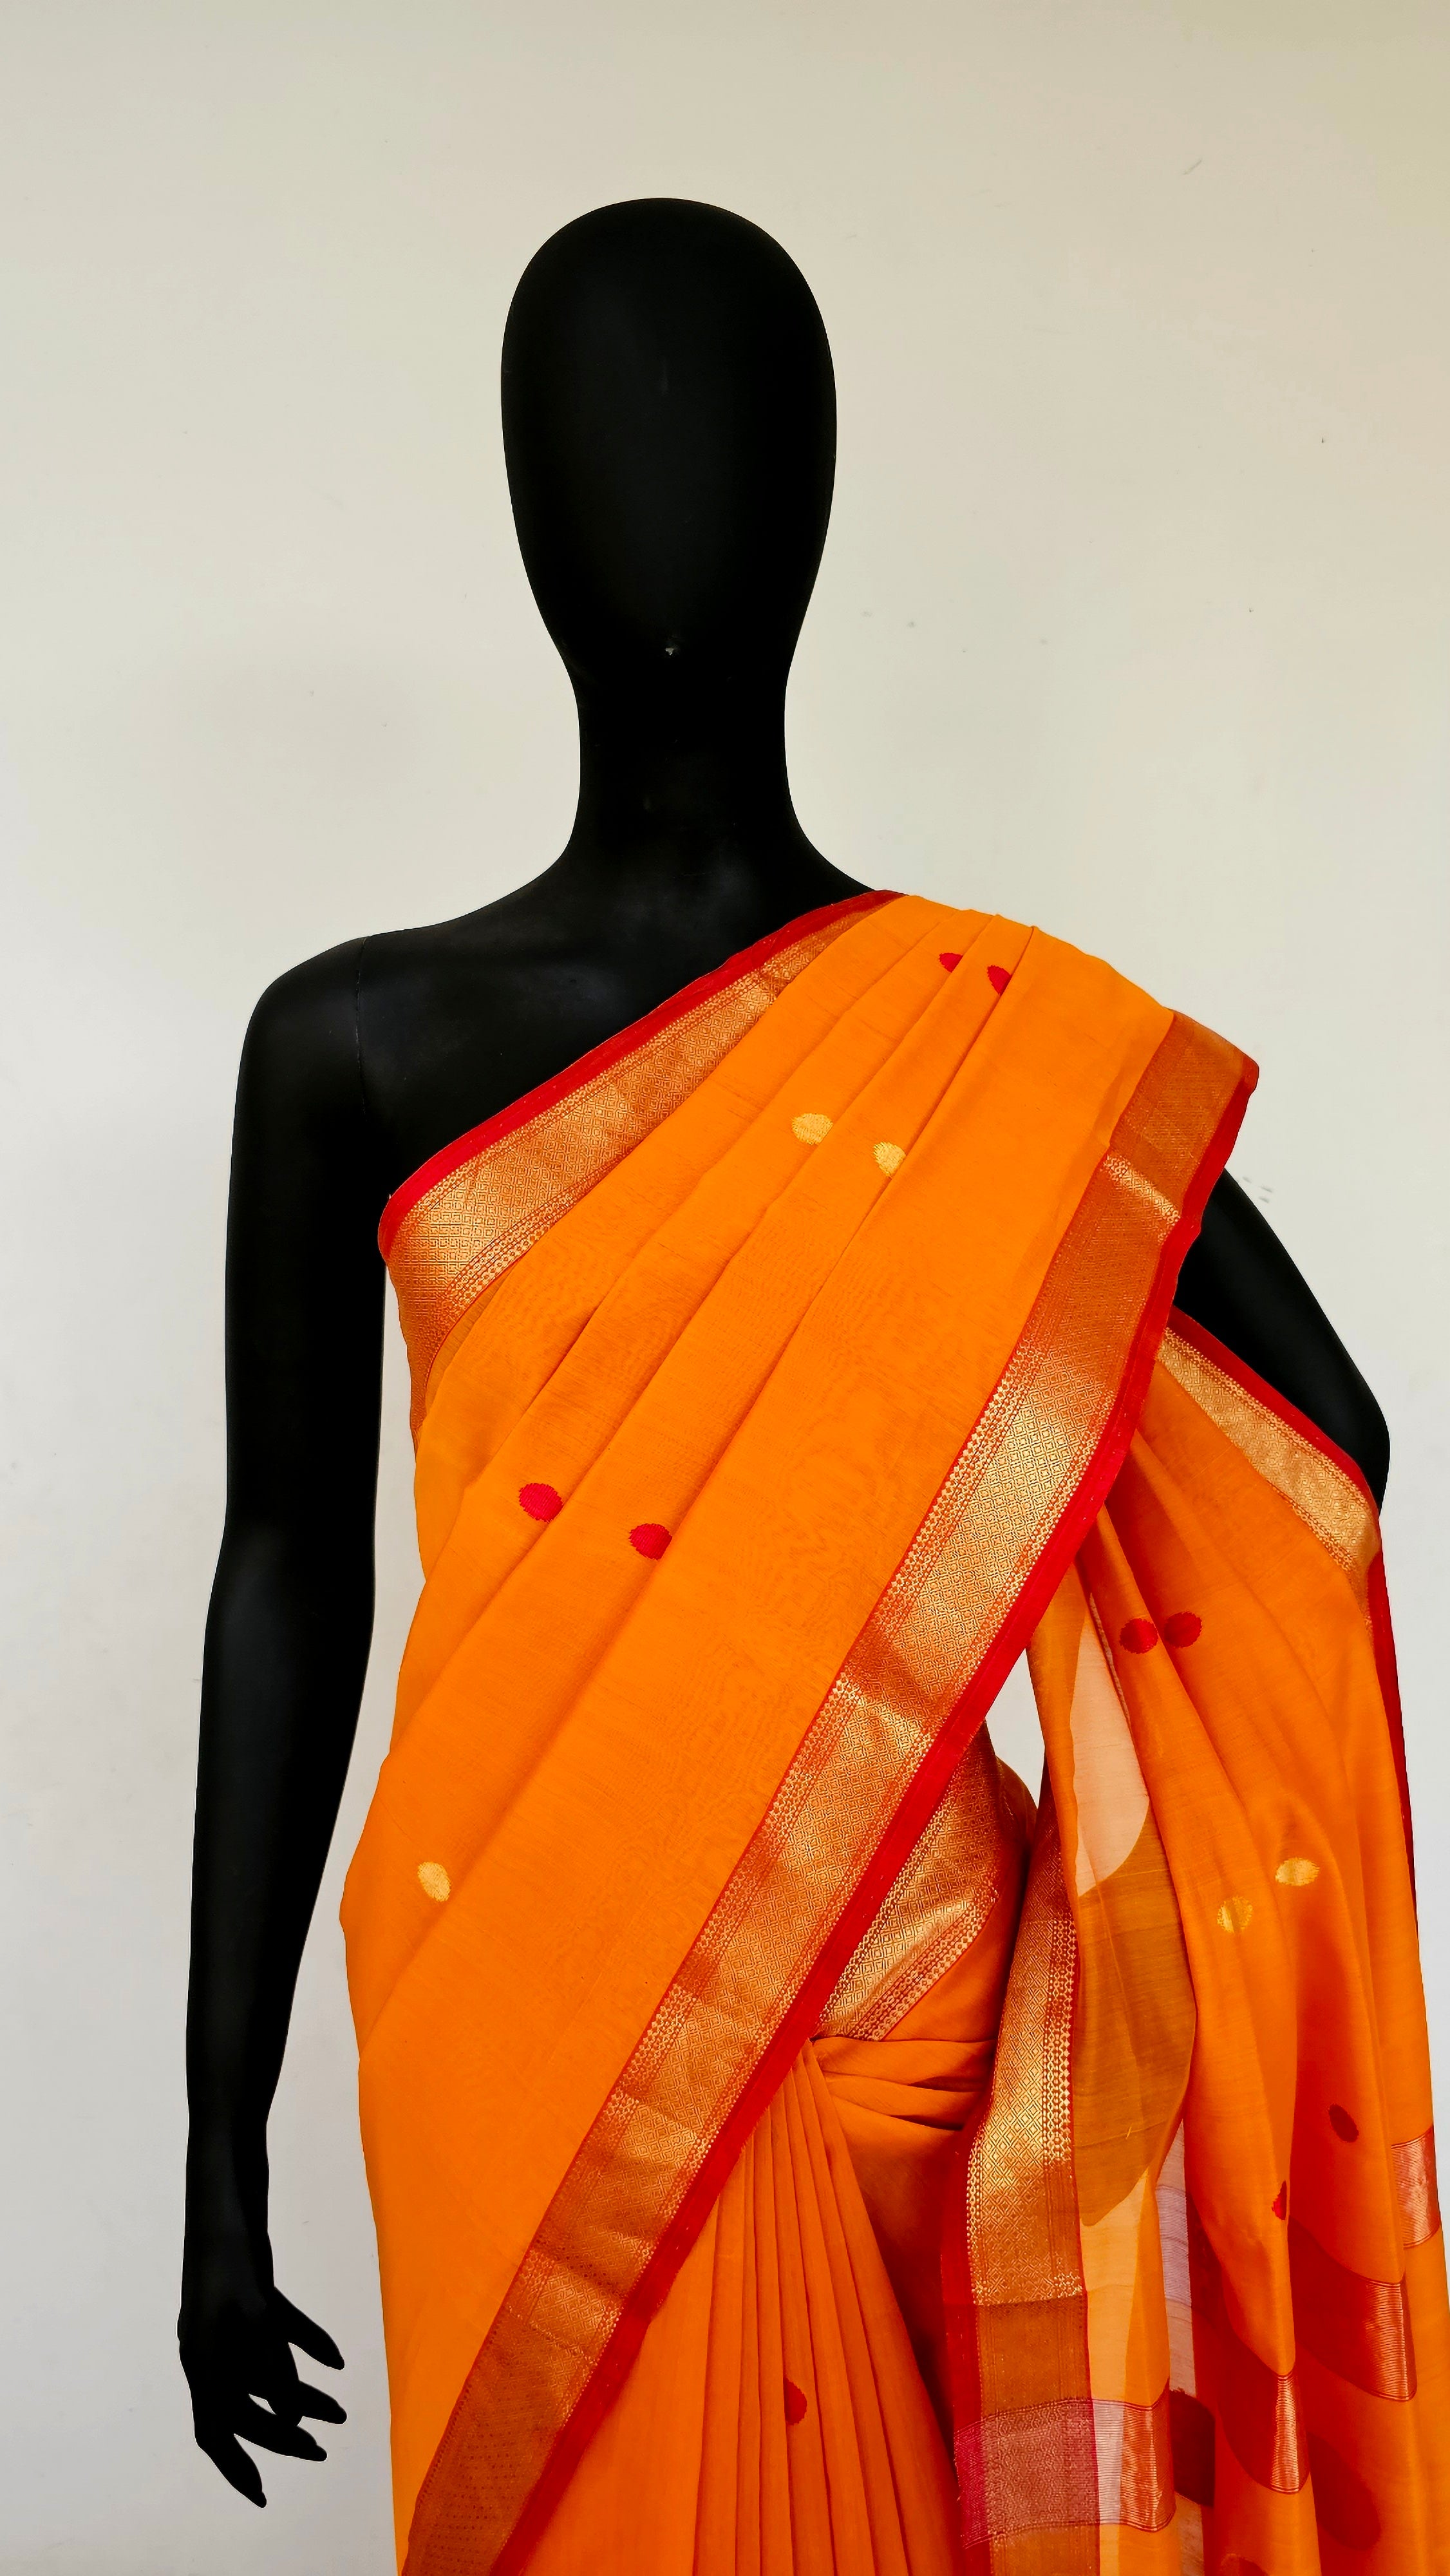 Bright Orange Saree with Booties,Butas and Red/Gold  Zari Borders.